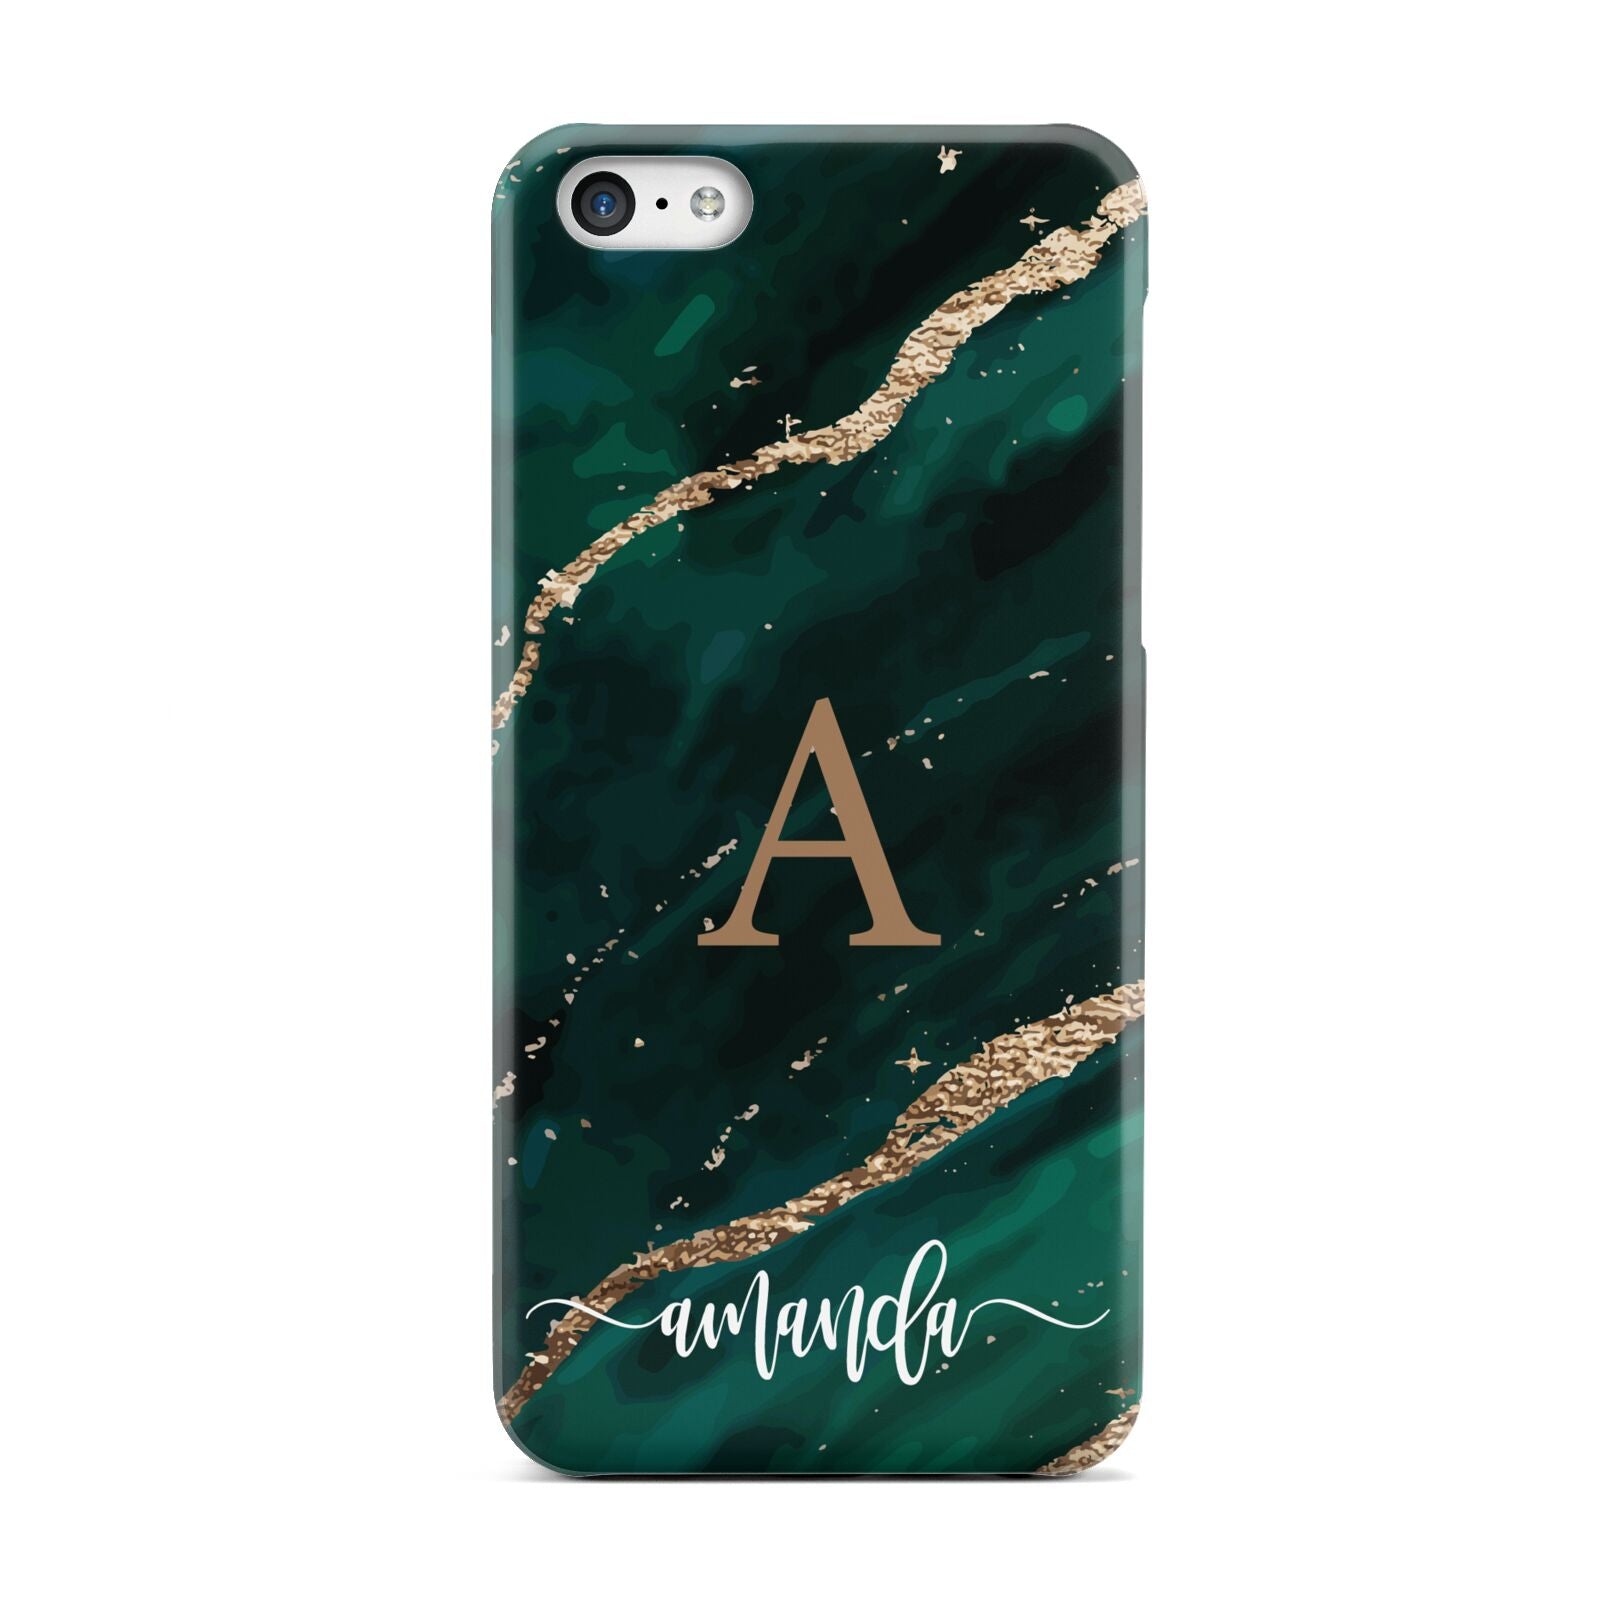 Green Marble Apple iPhone 5c Case